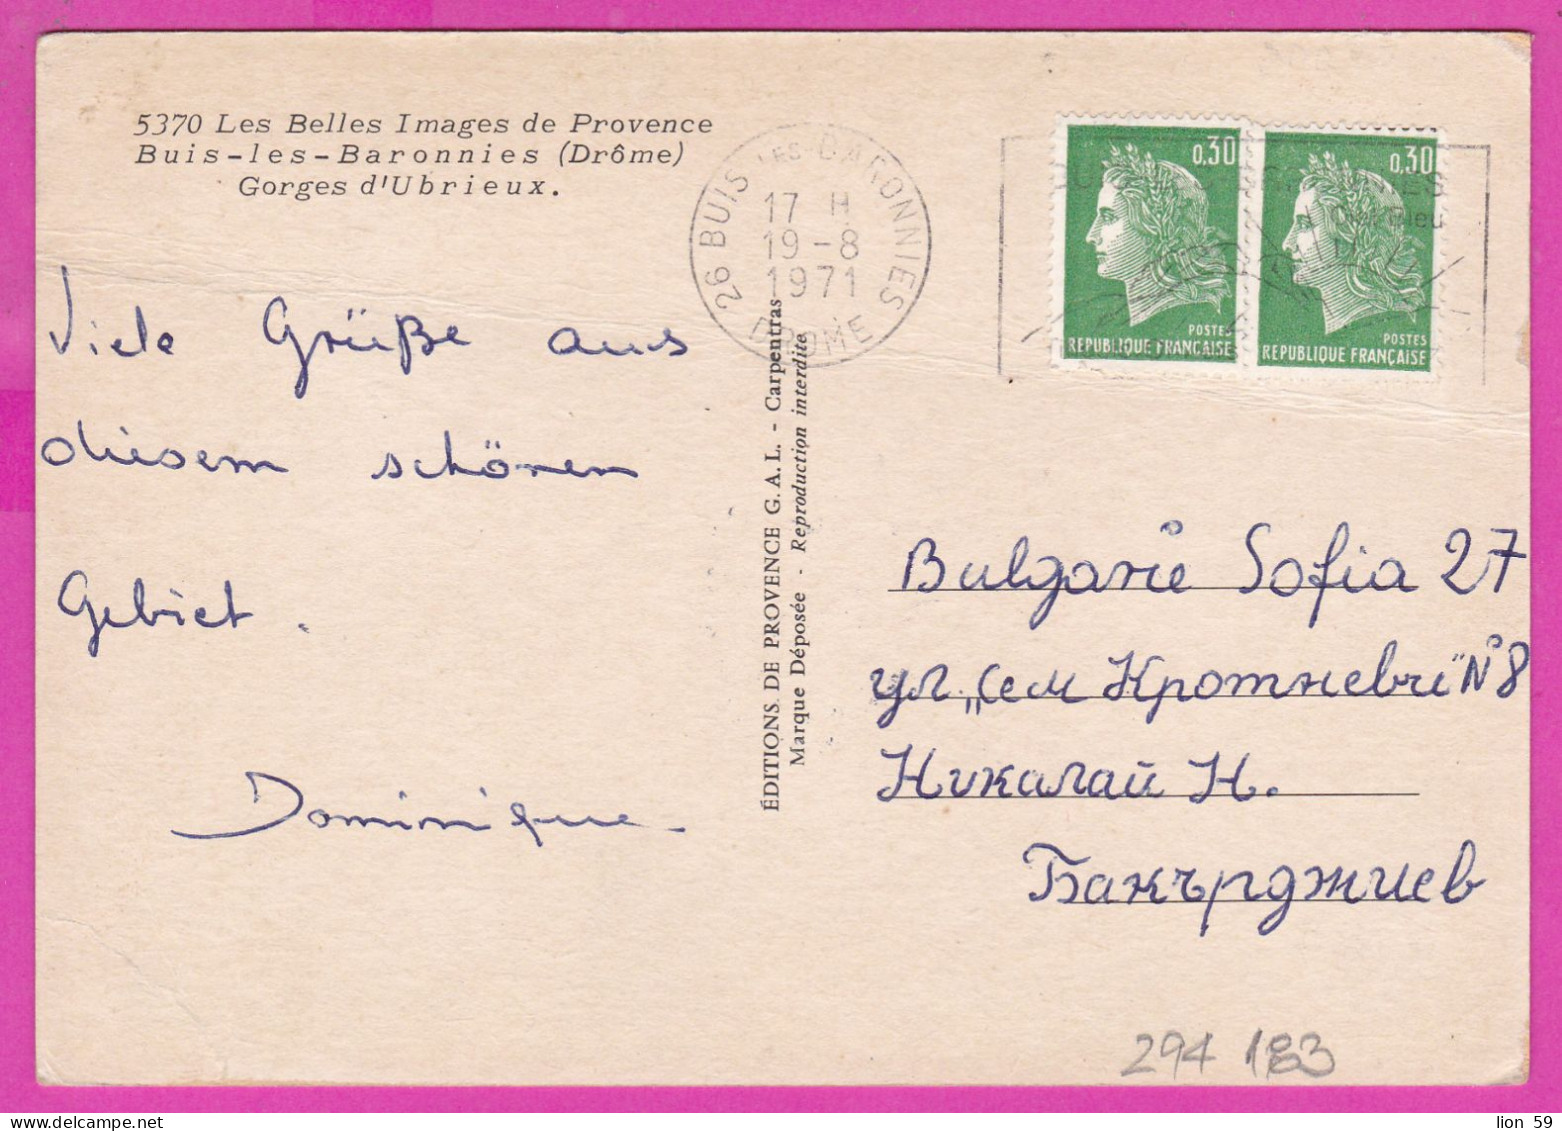 294183 / France - Buis-Les-Baronnies (Drome) Gorges D'Ubrieux PC 1971 USED 0.30+0.30 Fr. Marianne De Cheffer Flamme - 1967-1970 Marianne Of Cheffer